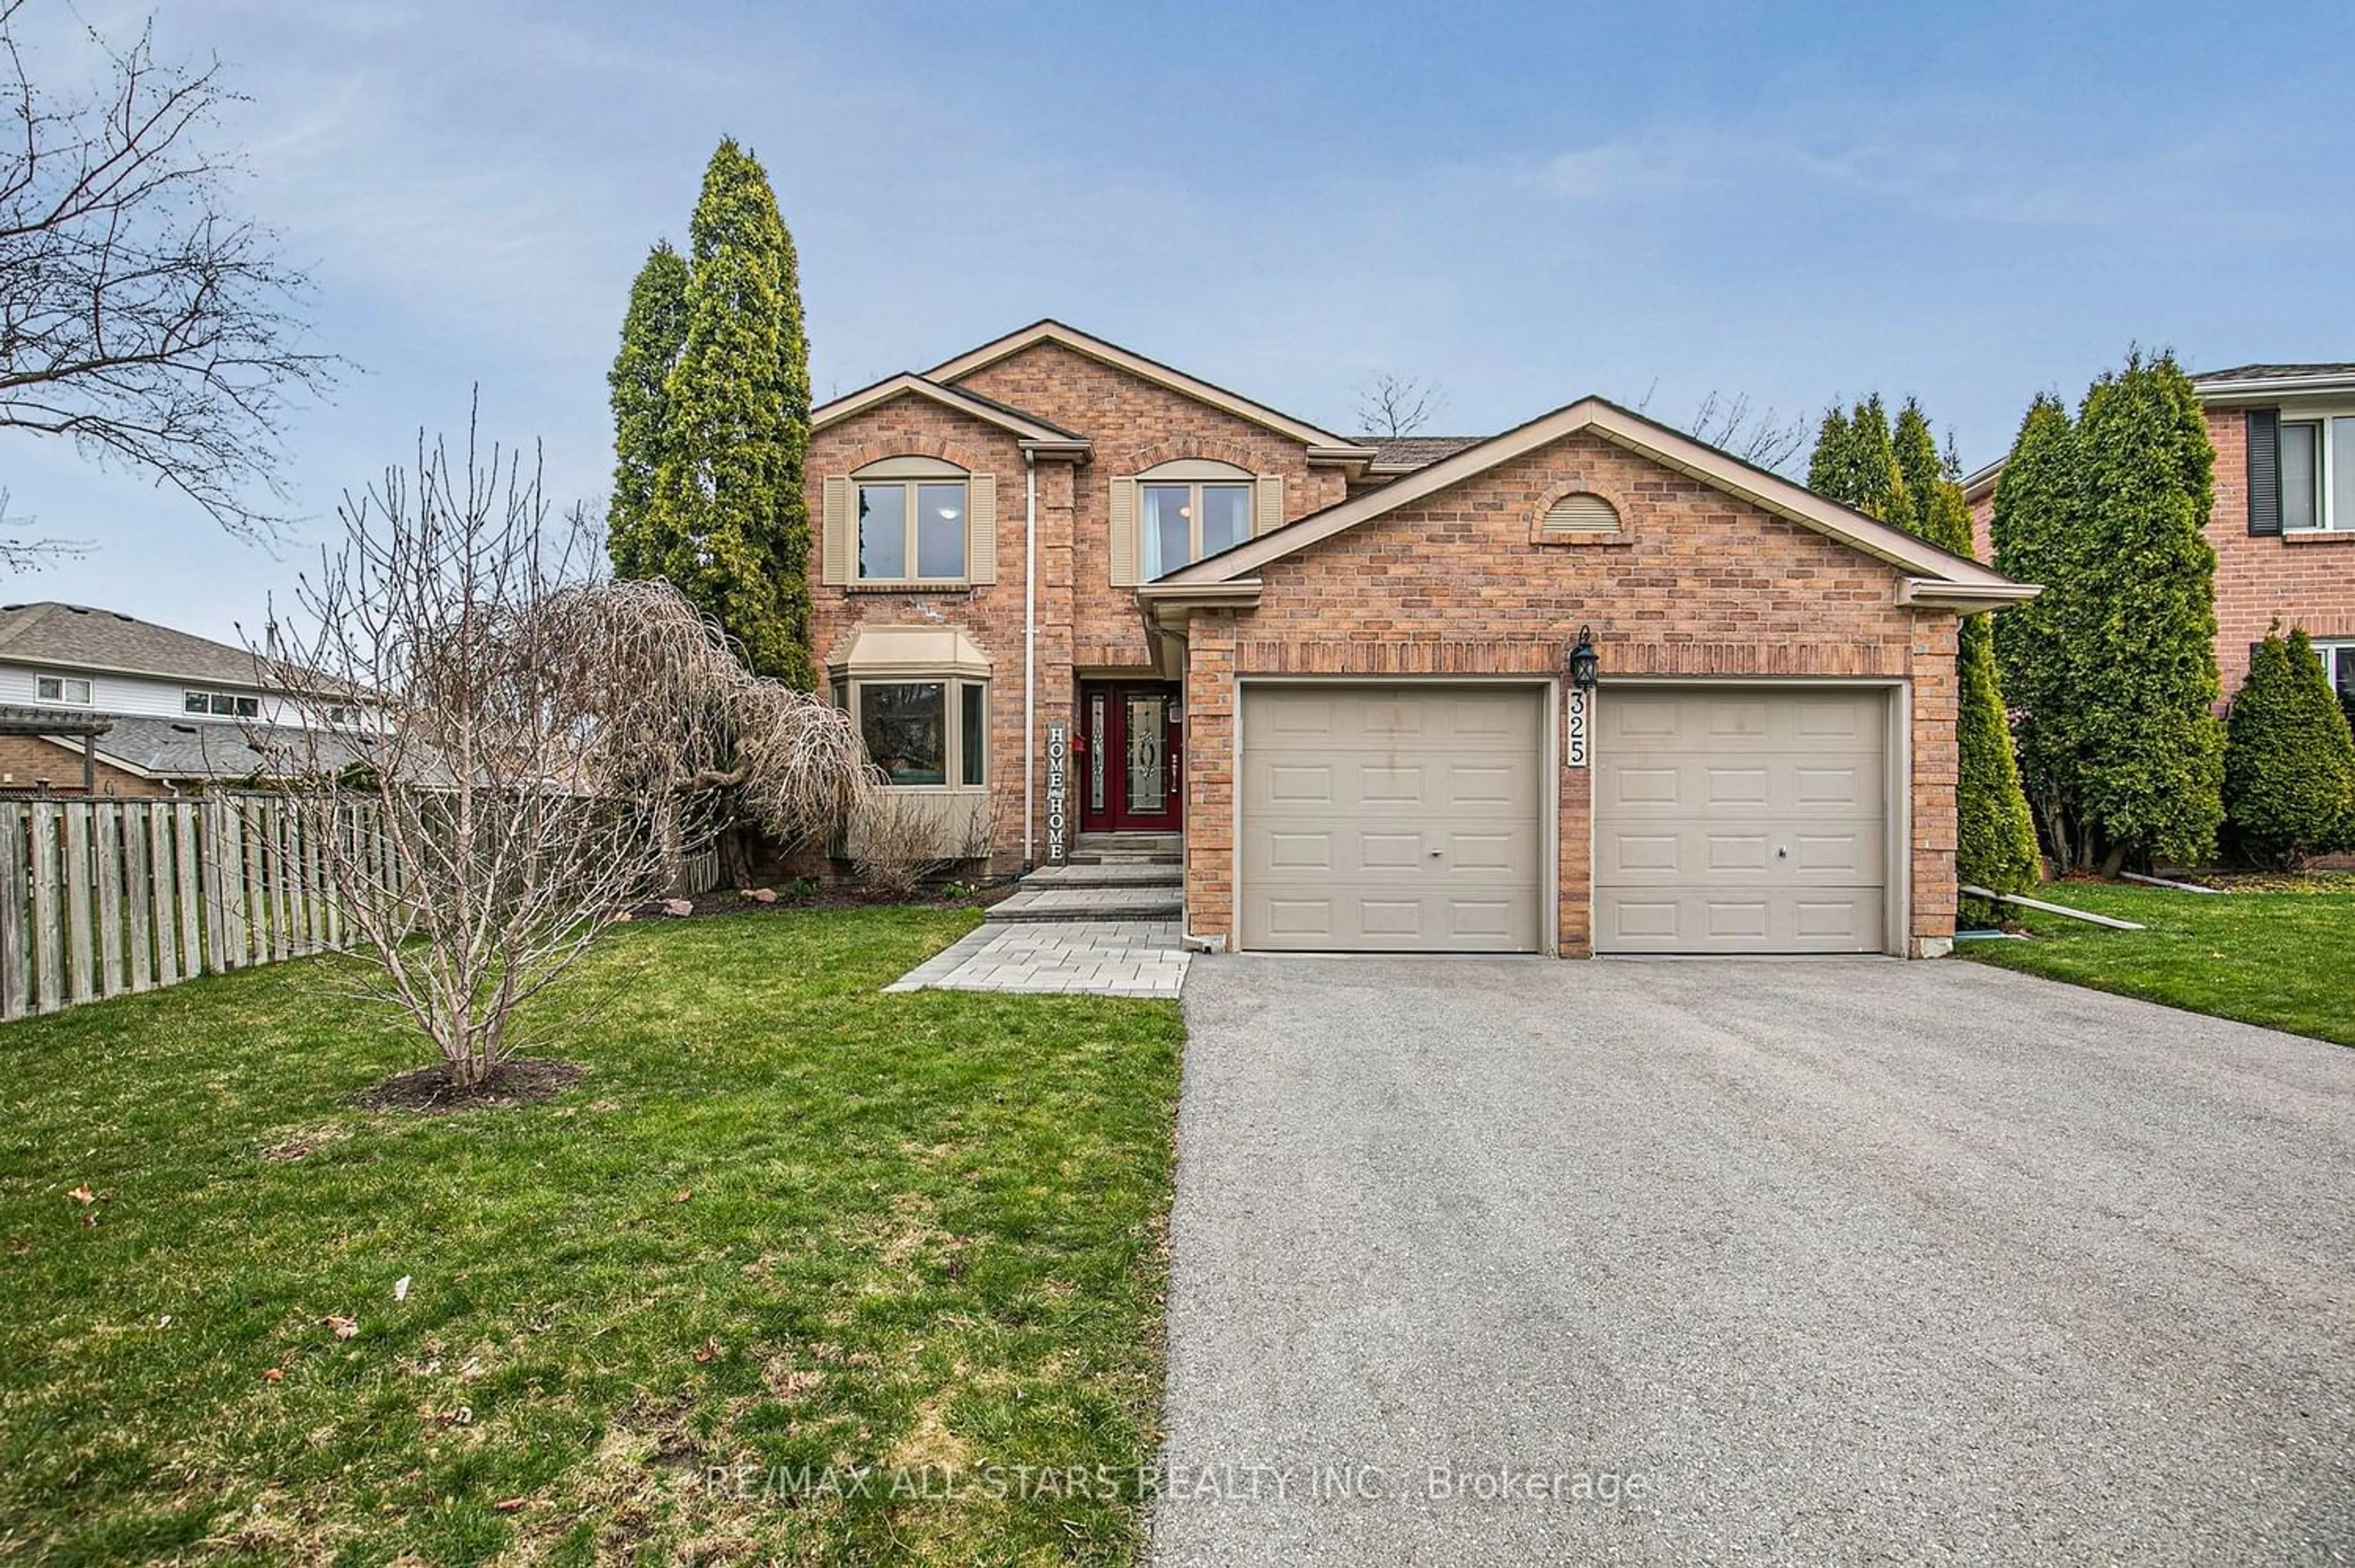 Home with brick exterior material for 325 Rannie Rd, Newmarket Ontario L3X 1K3